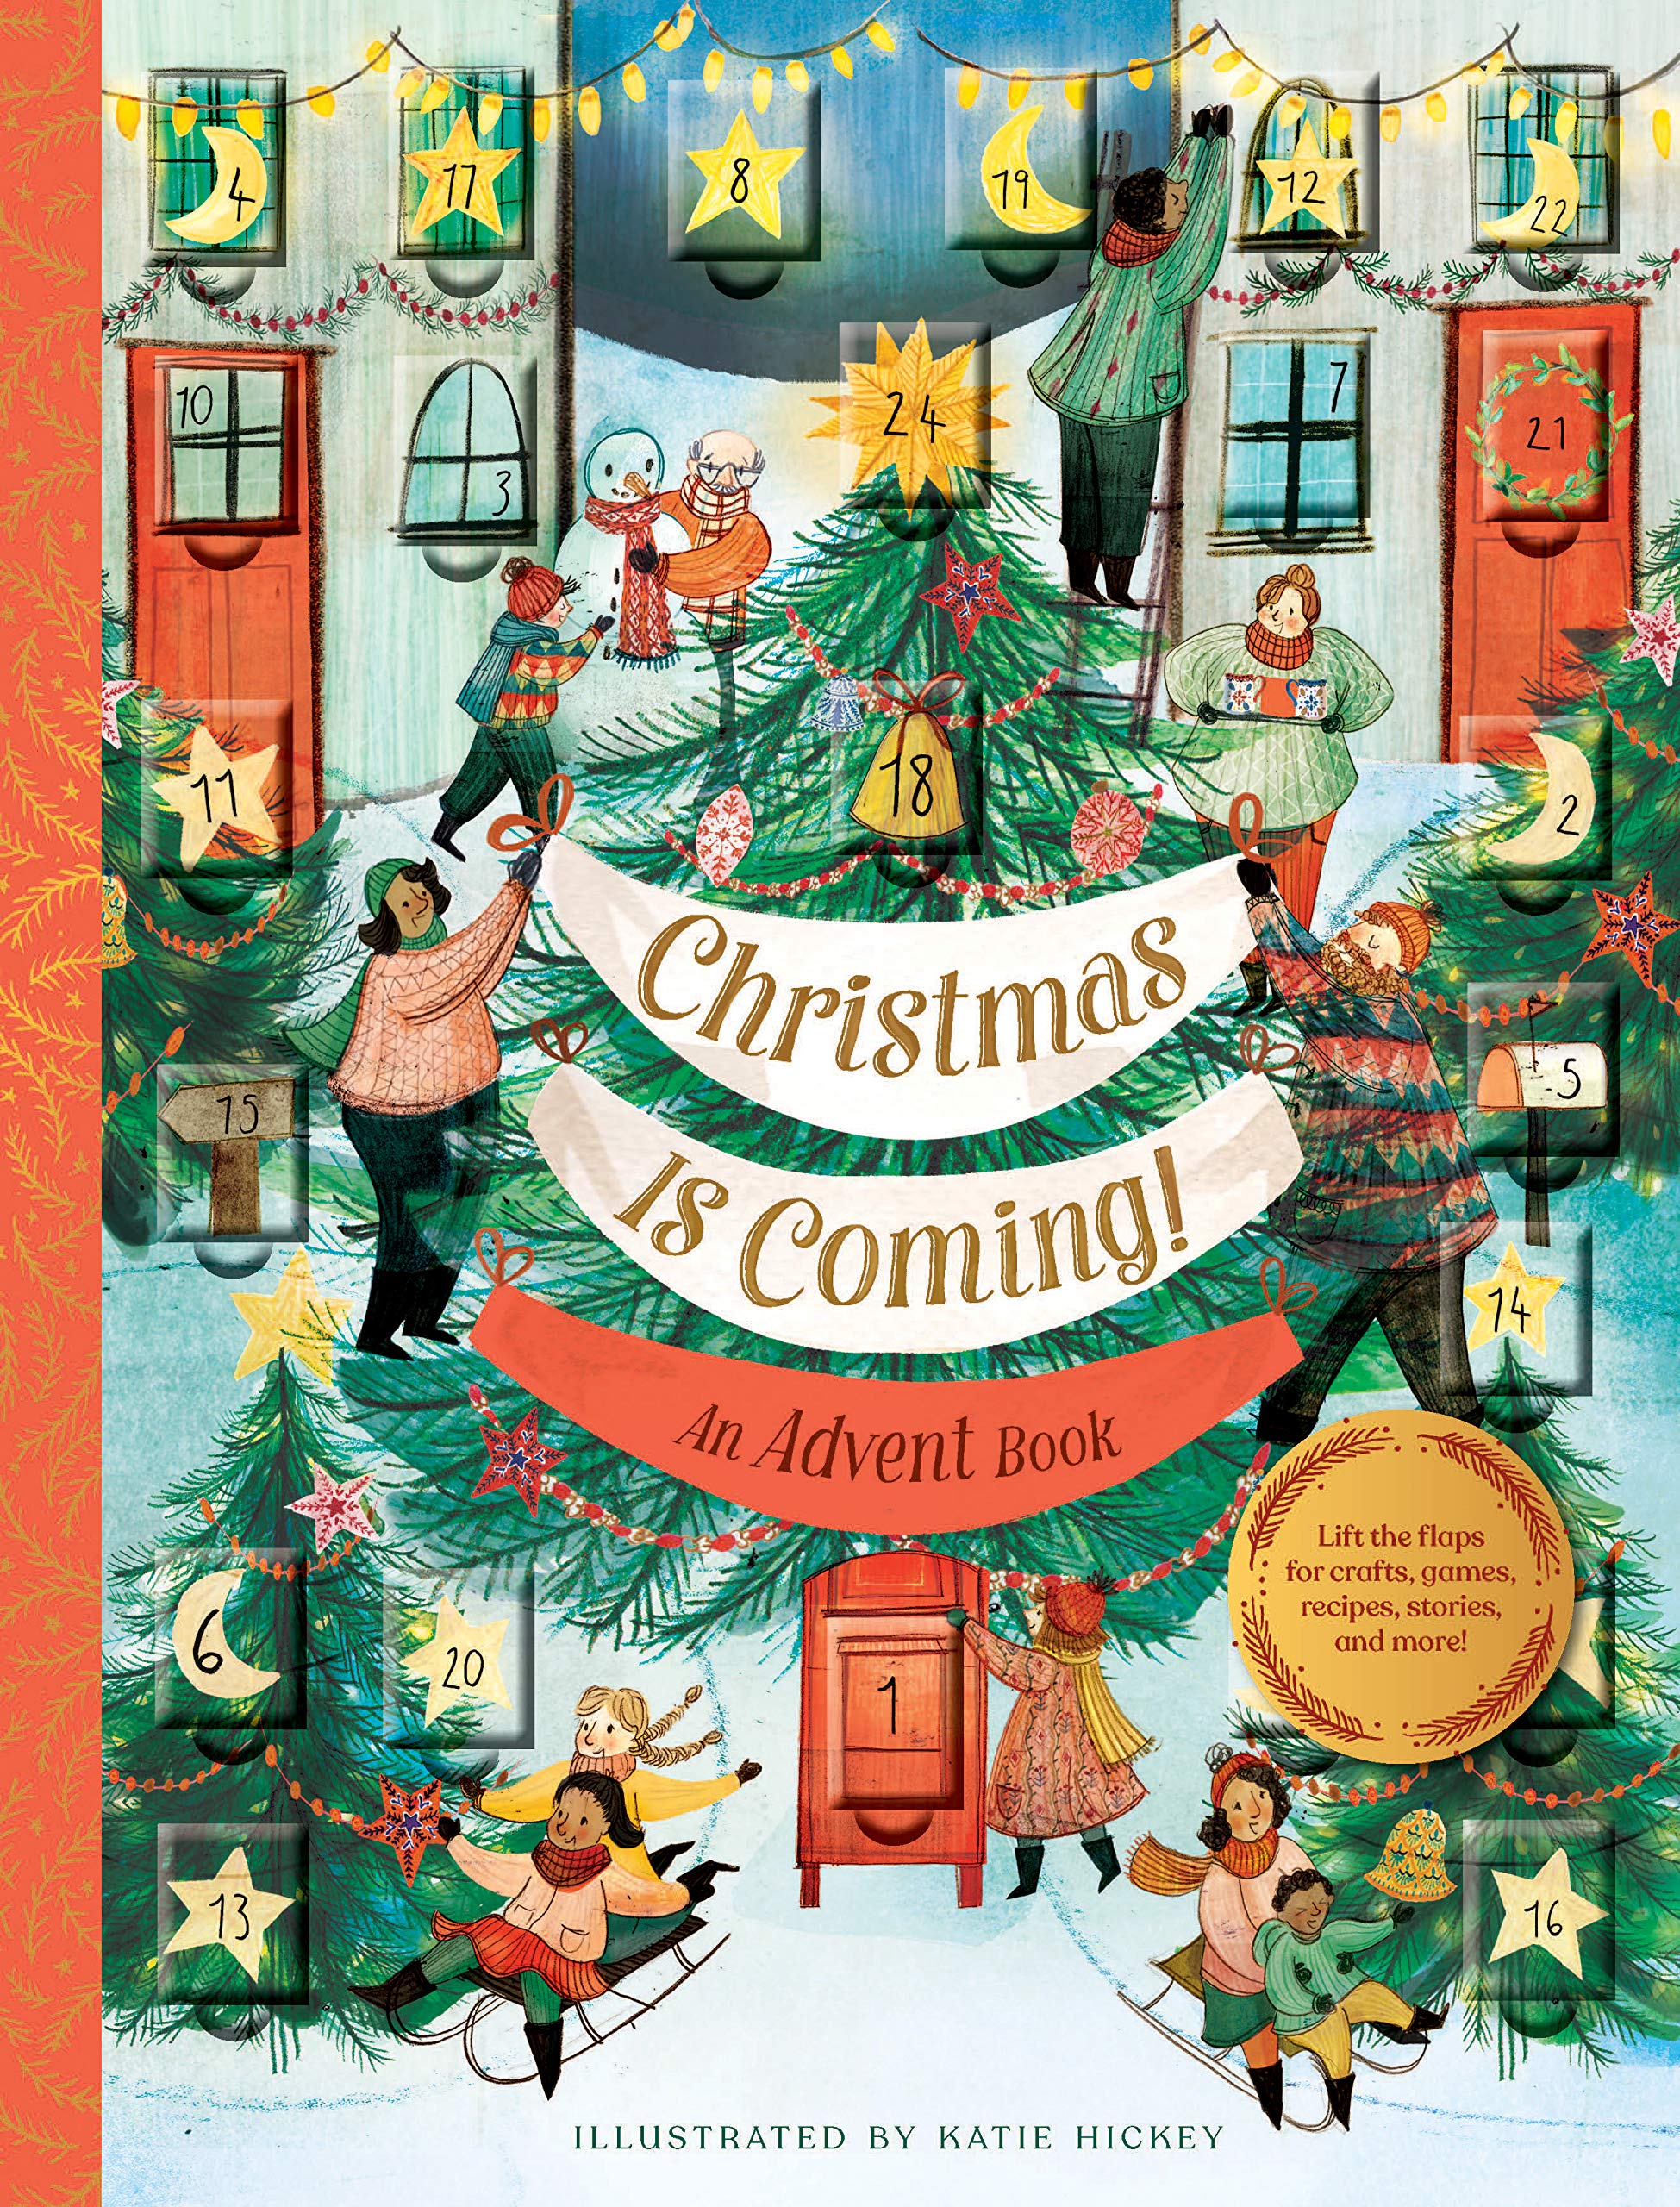 Christmas is Coming: an Advent Book